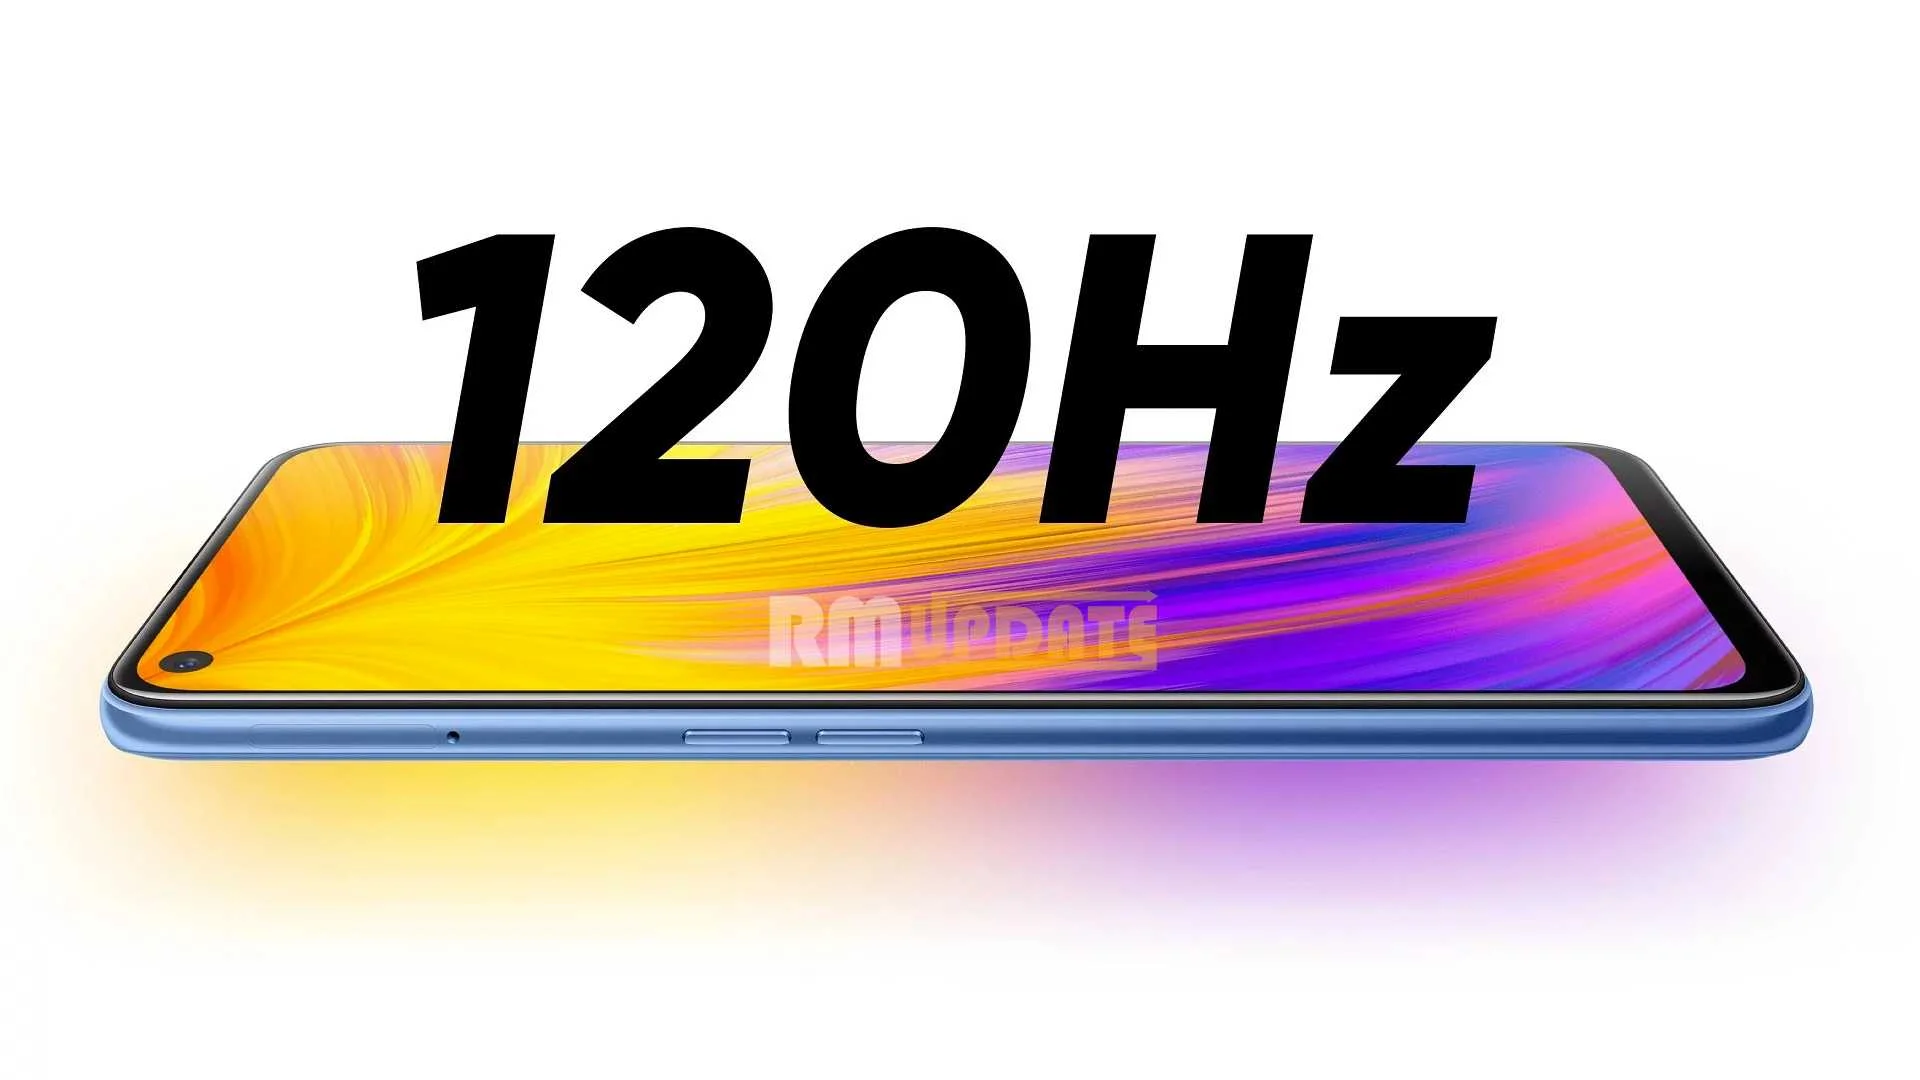 Realme UI 3.0: How to Change Screen refresh rate 60Hz to 90Hz or 120Hz